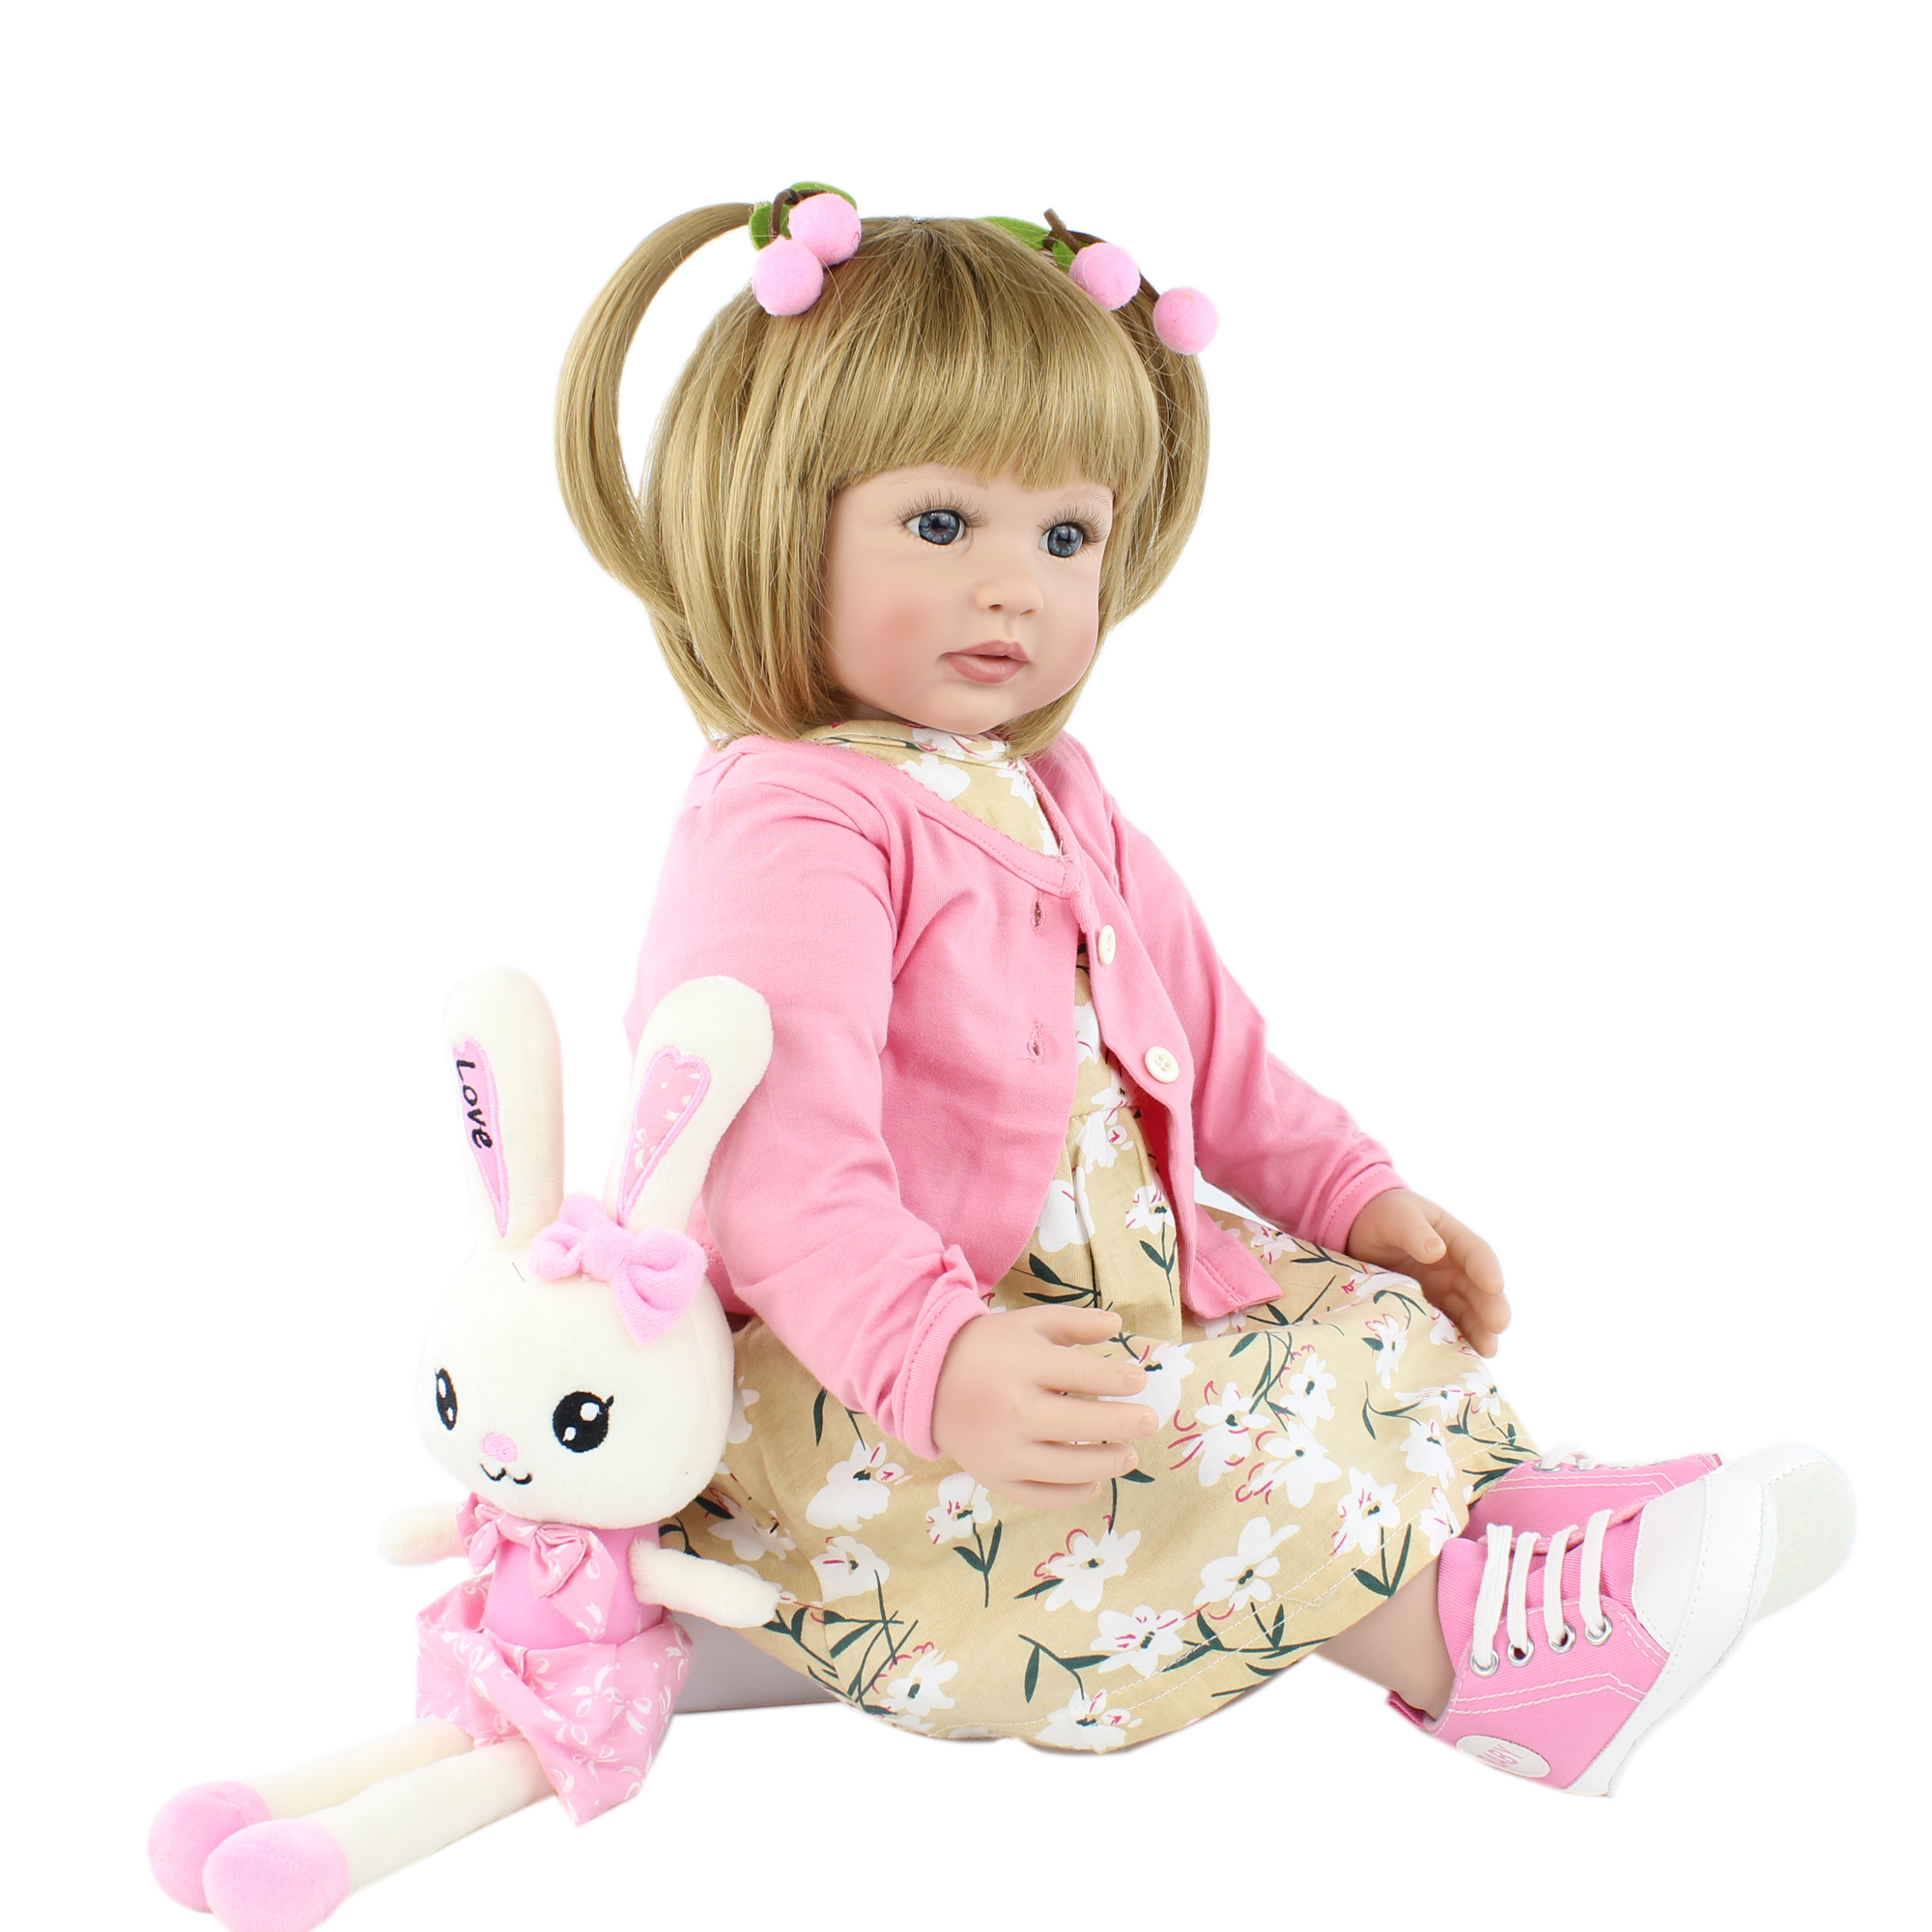 60 CM Soft Silicone Reborn Baby Doll Toys For Girl Blonde Princess Toddler Boneca Lovely Birthday Christmas Gift Brinquedos